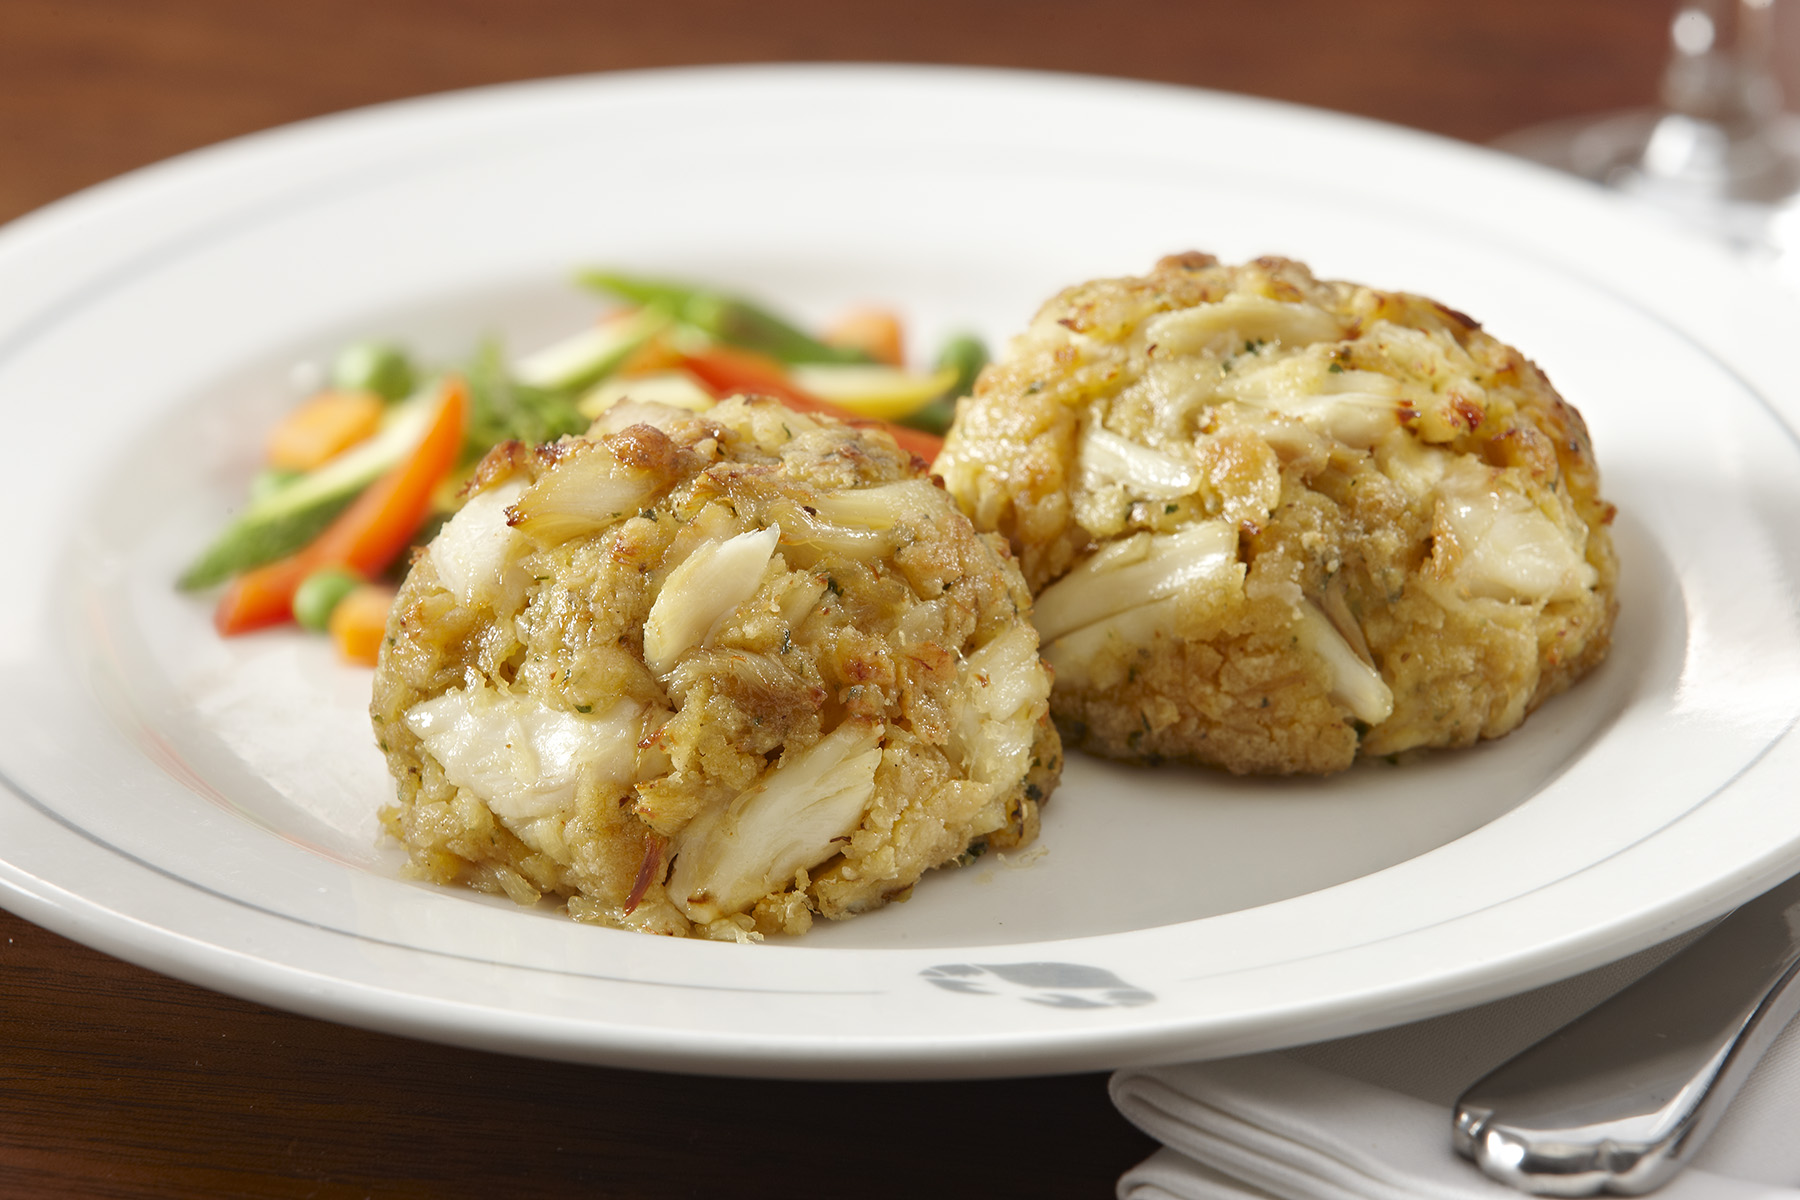 Baltimore-Style Crab Cakes (from Food and Wine Magazine) - The Hive